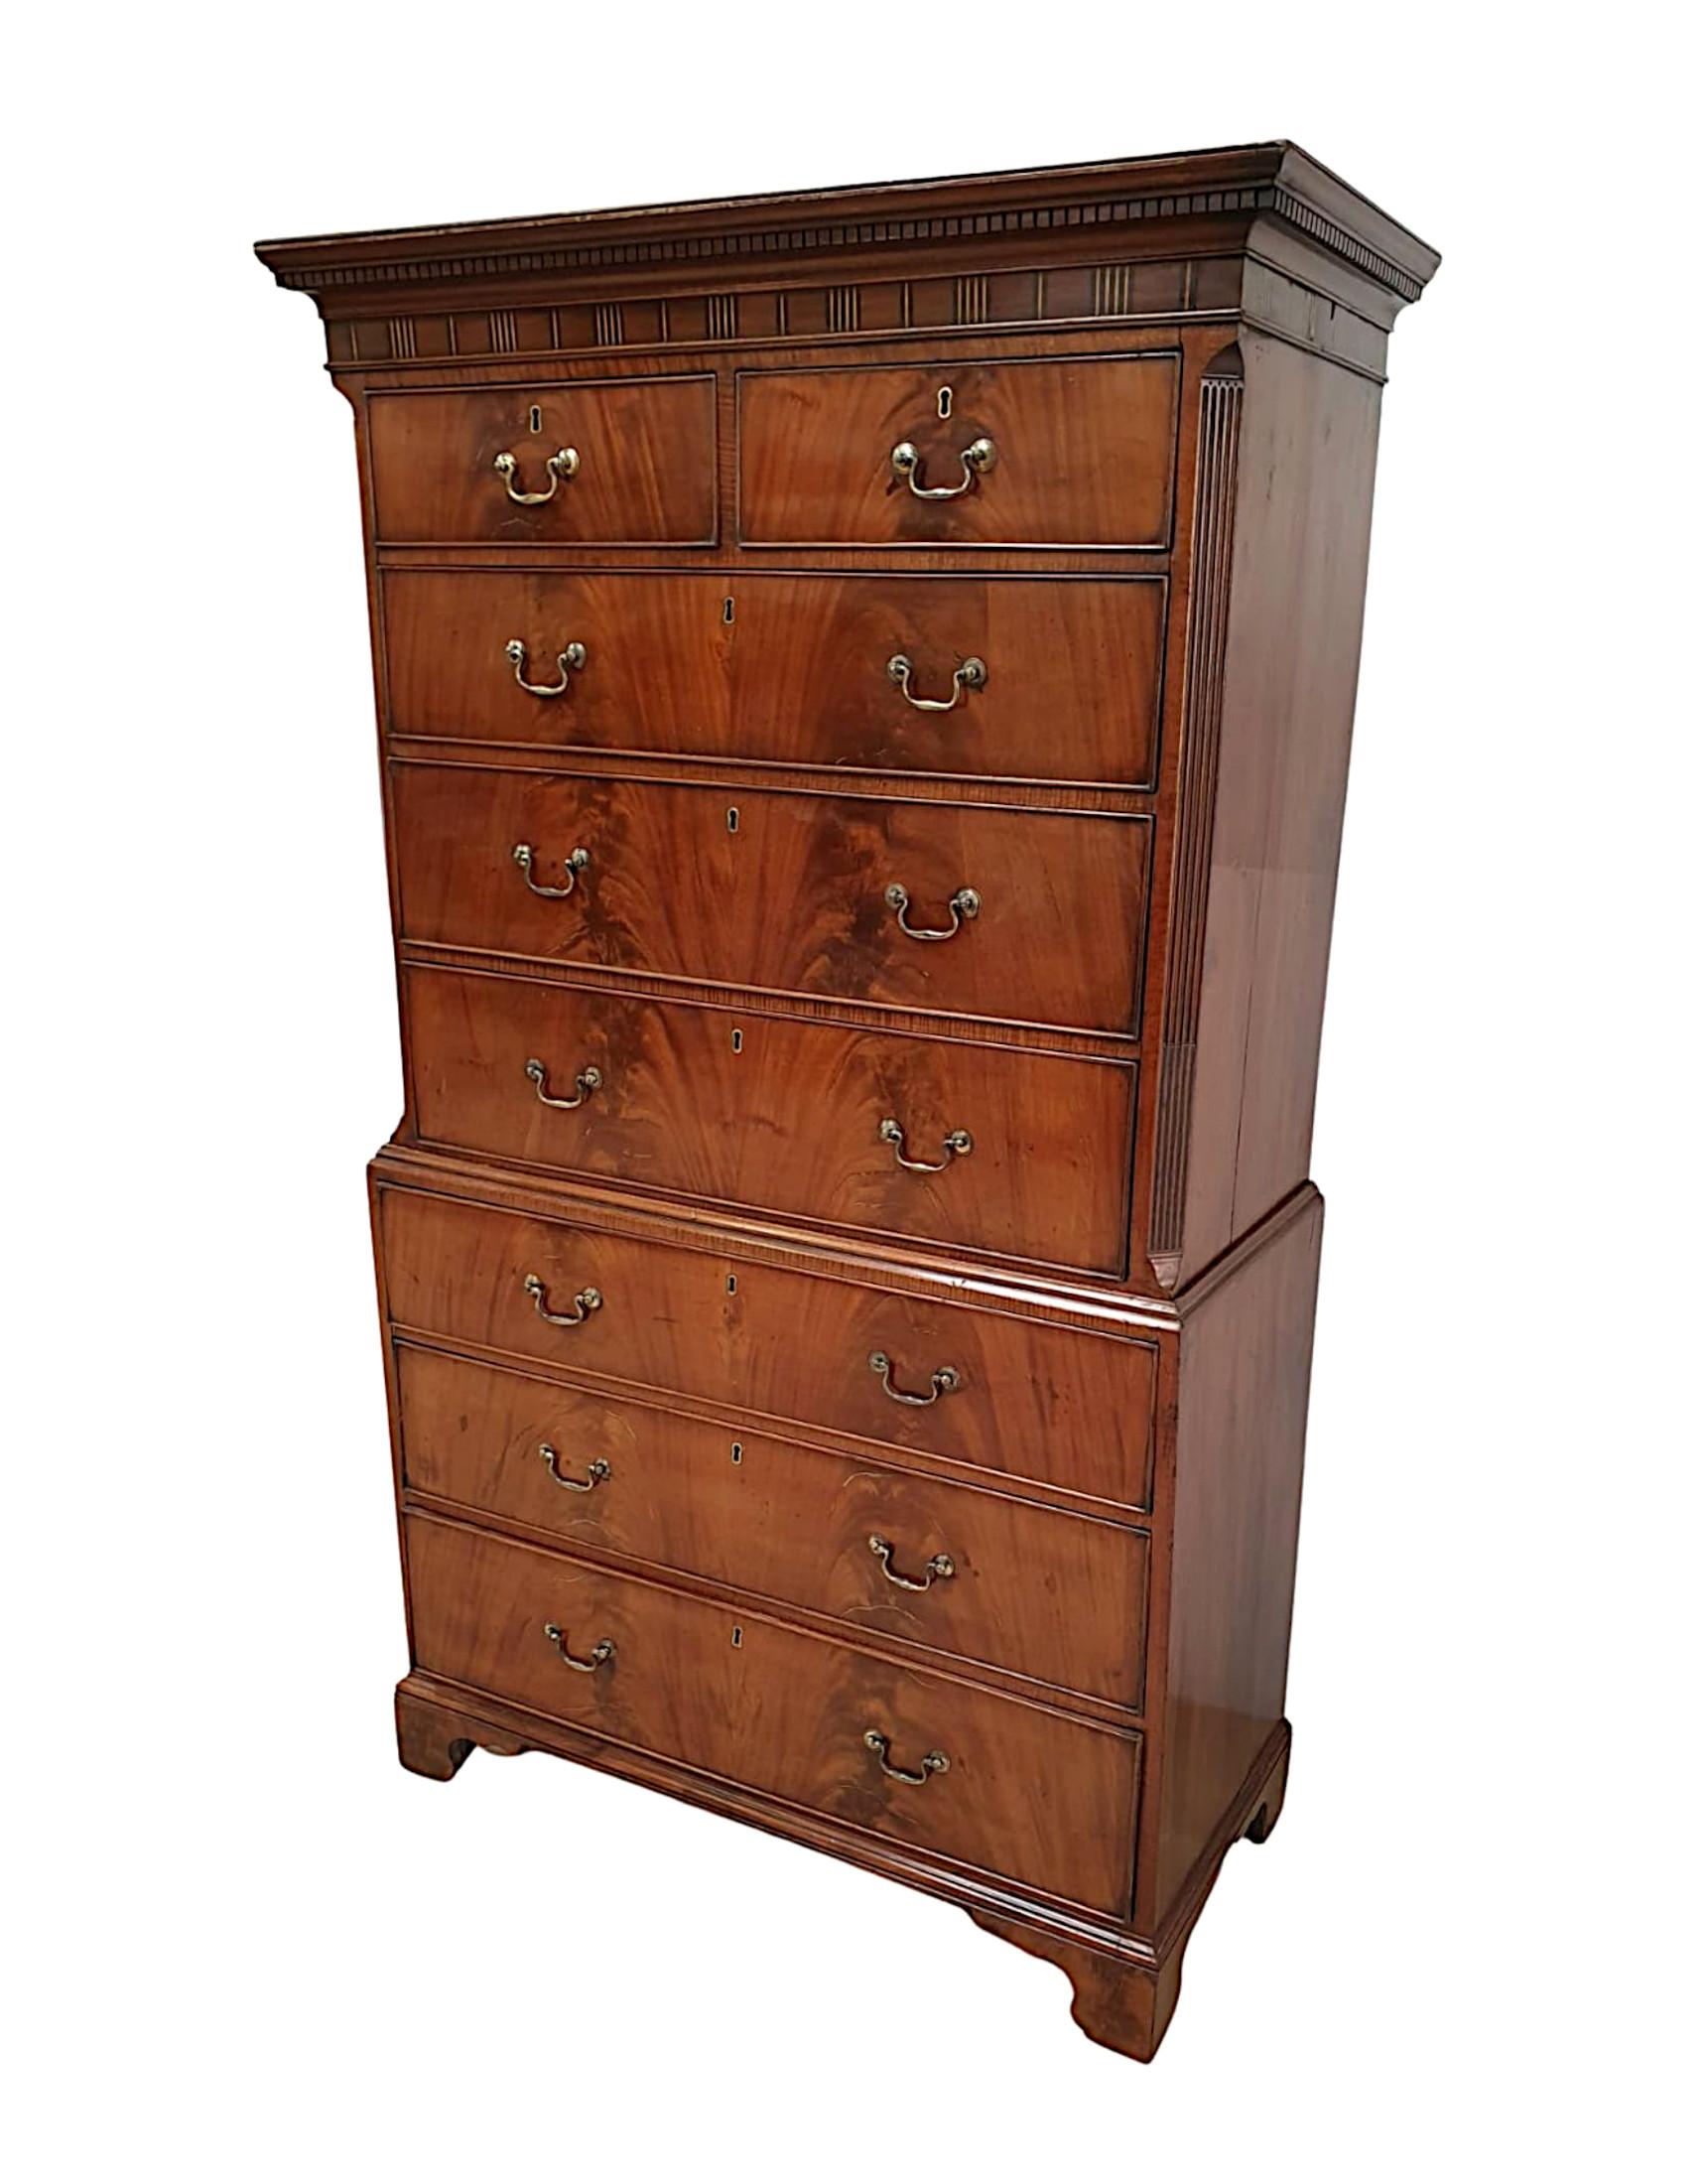 A superb early 19th century George III flame mahogany chest on chest, the upper section with a stepped moulded Cavetto cornice and finely hand carved detail raised over two short and three long graduated drawers, all cockbeaded with decorative brass